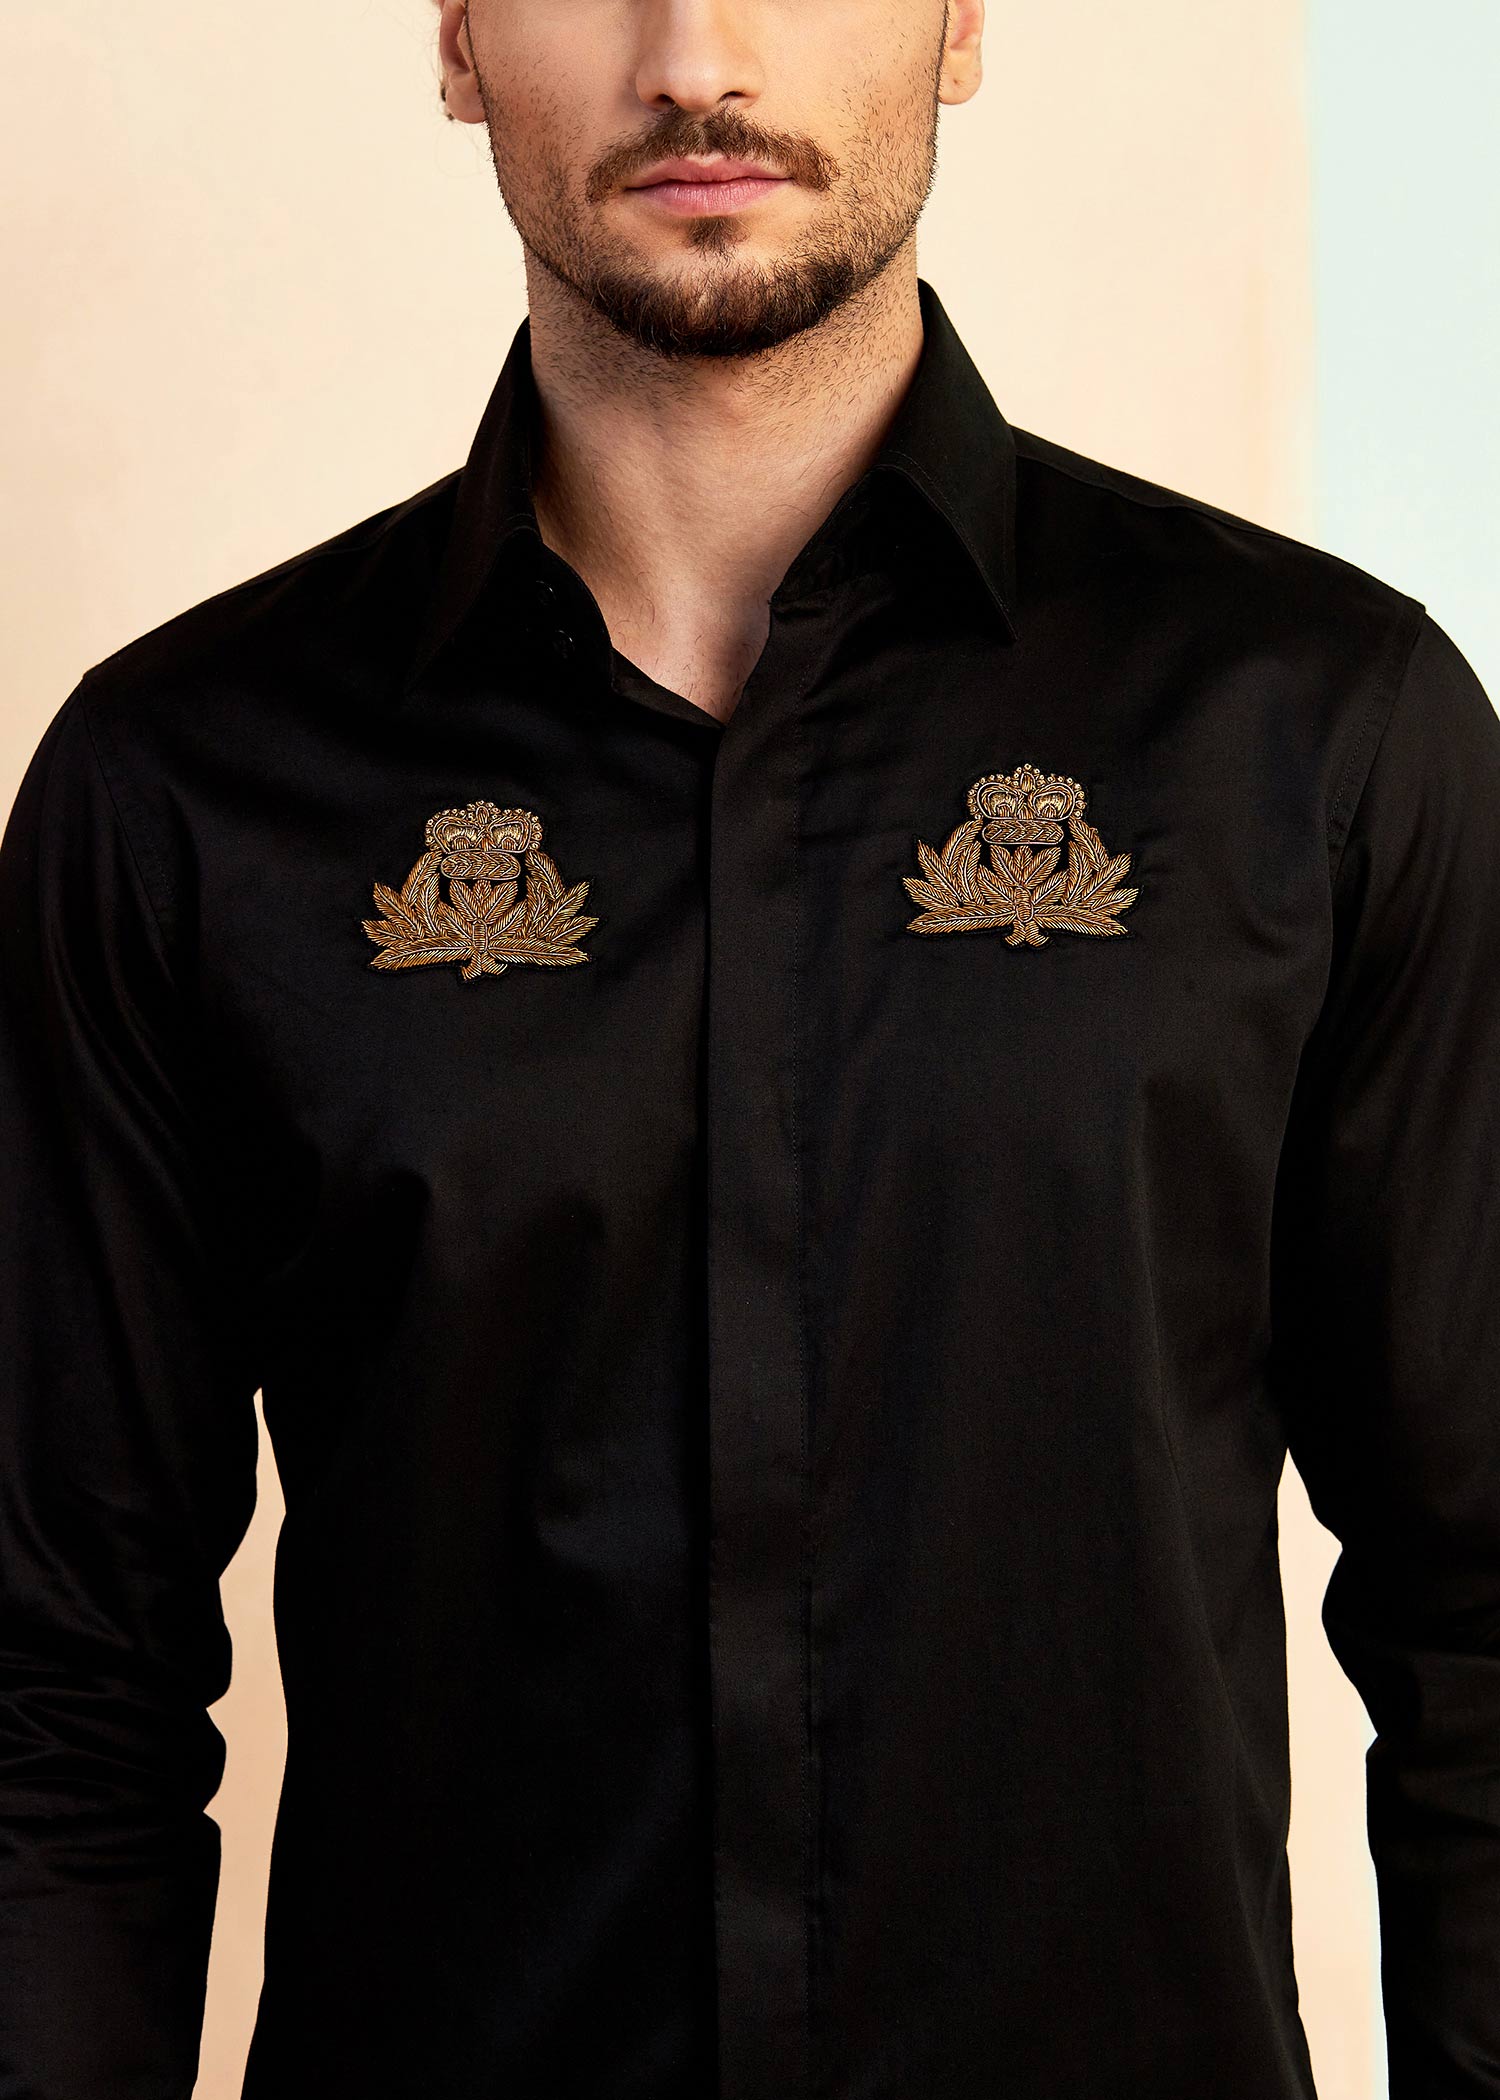 Dual Crest Embroidered